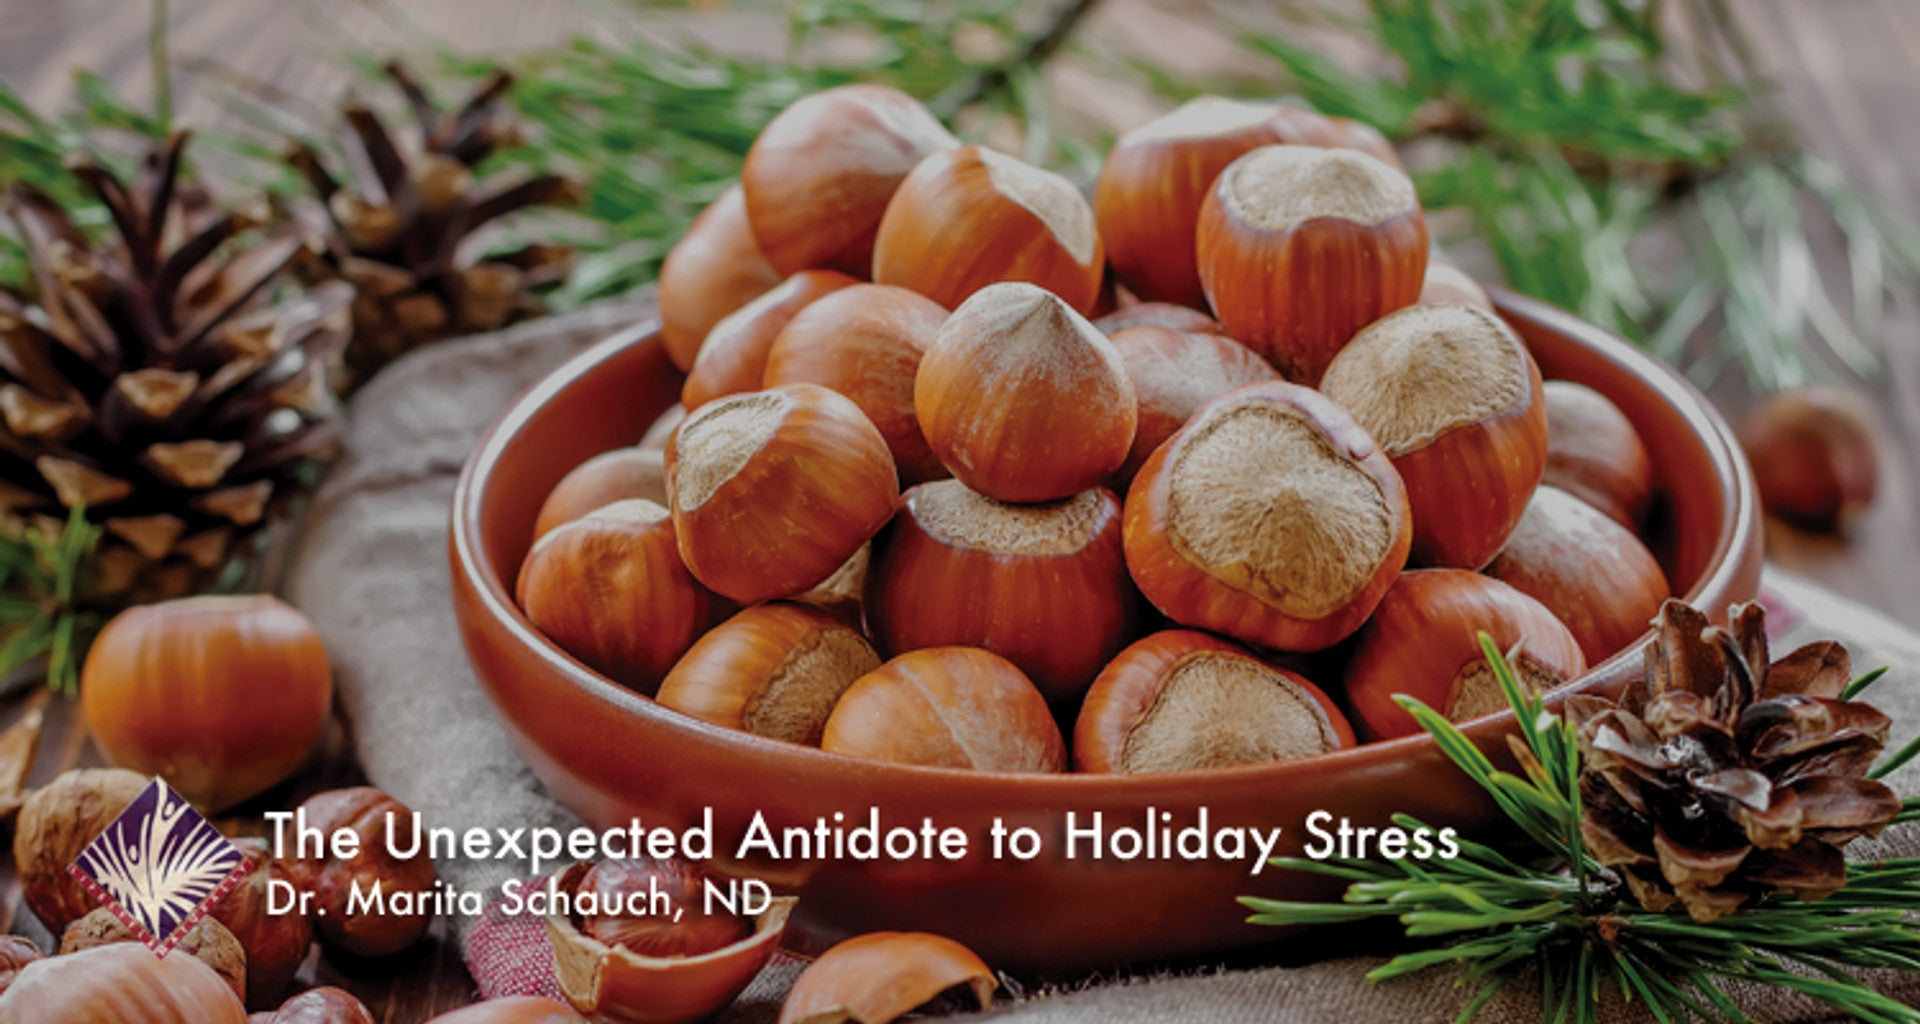 The Unexpected Antidote to Holiday Stress